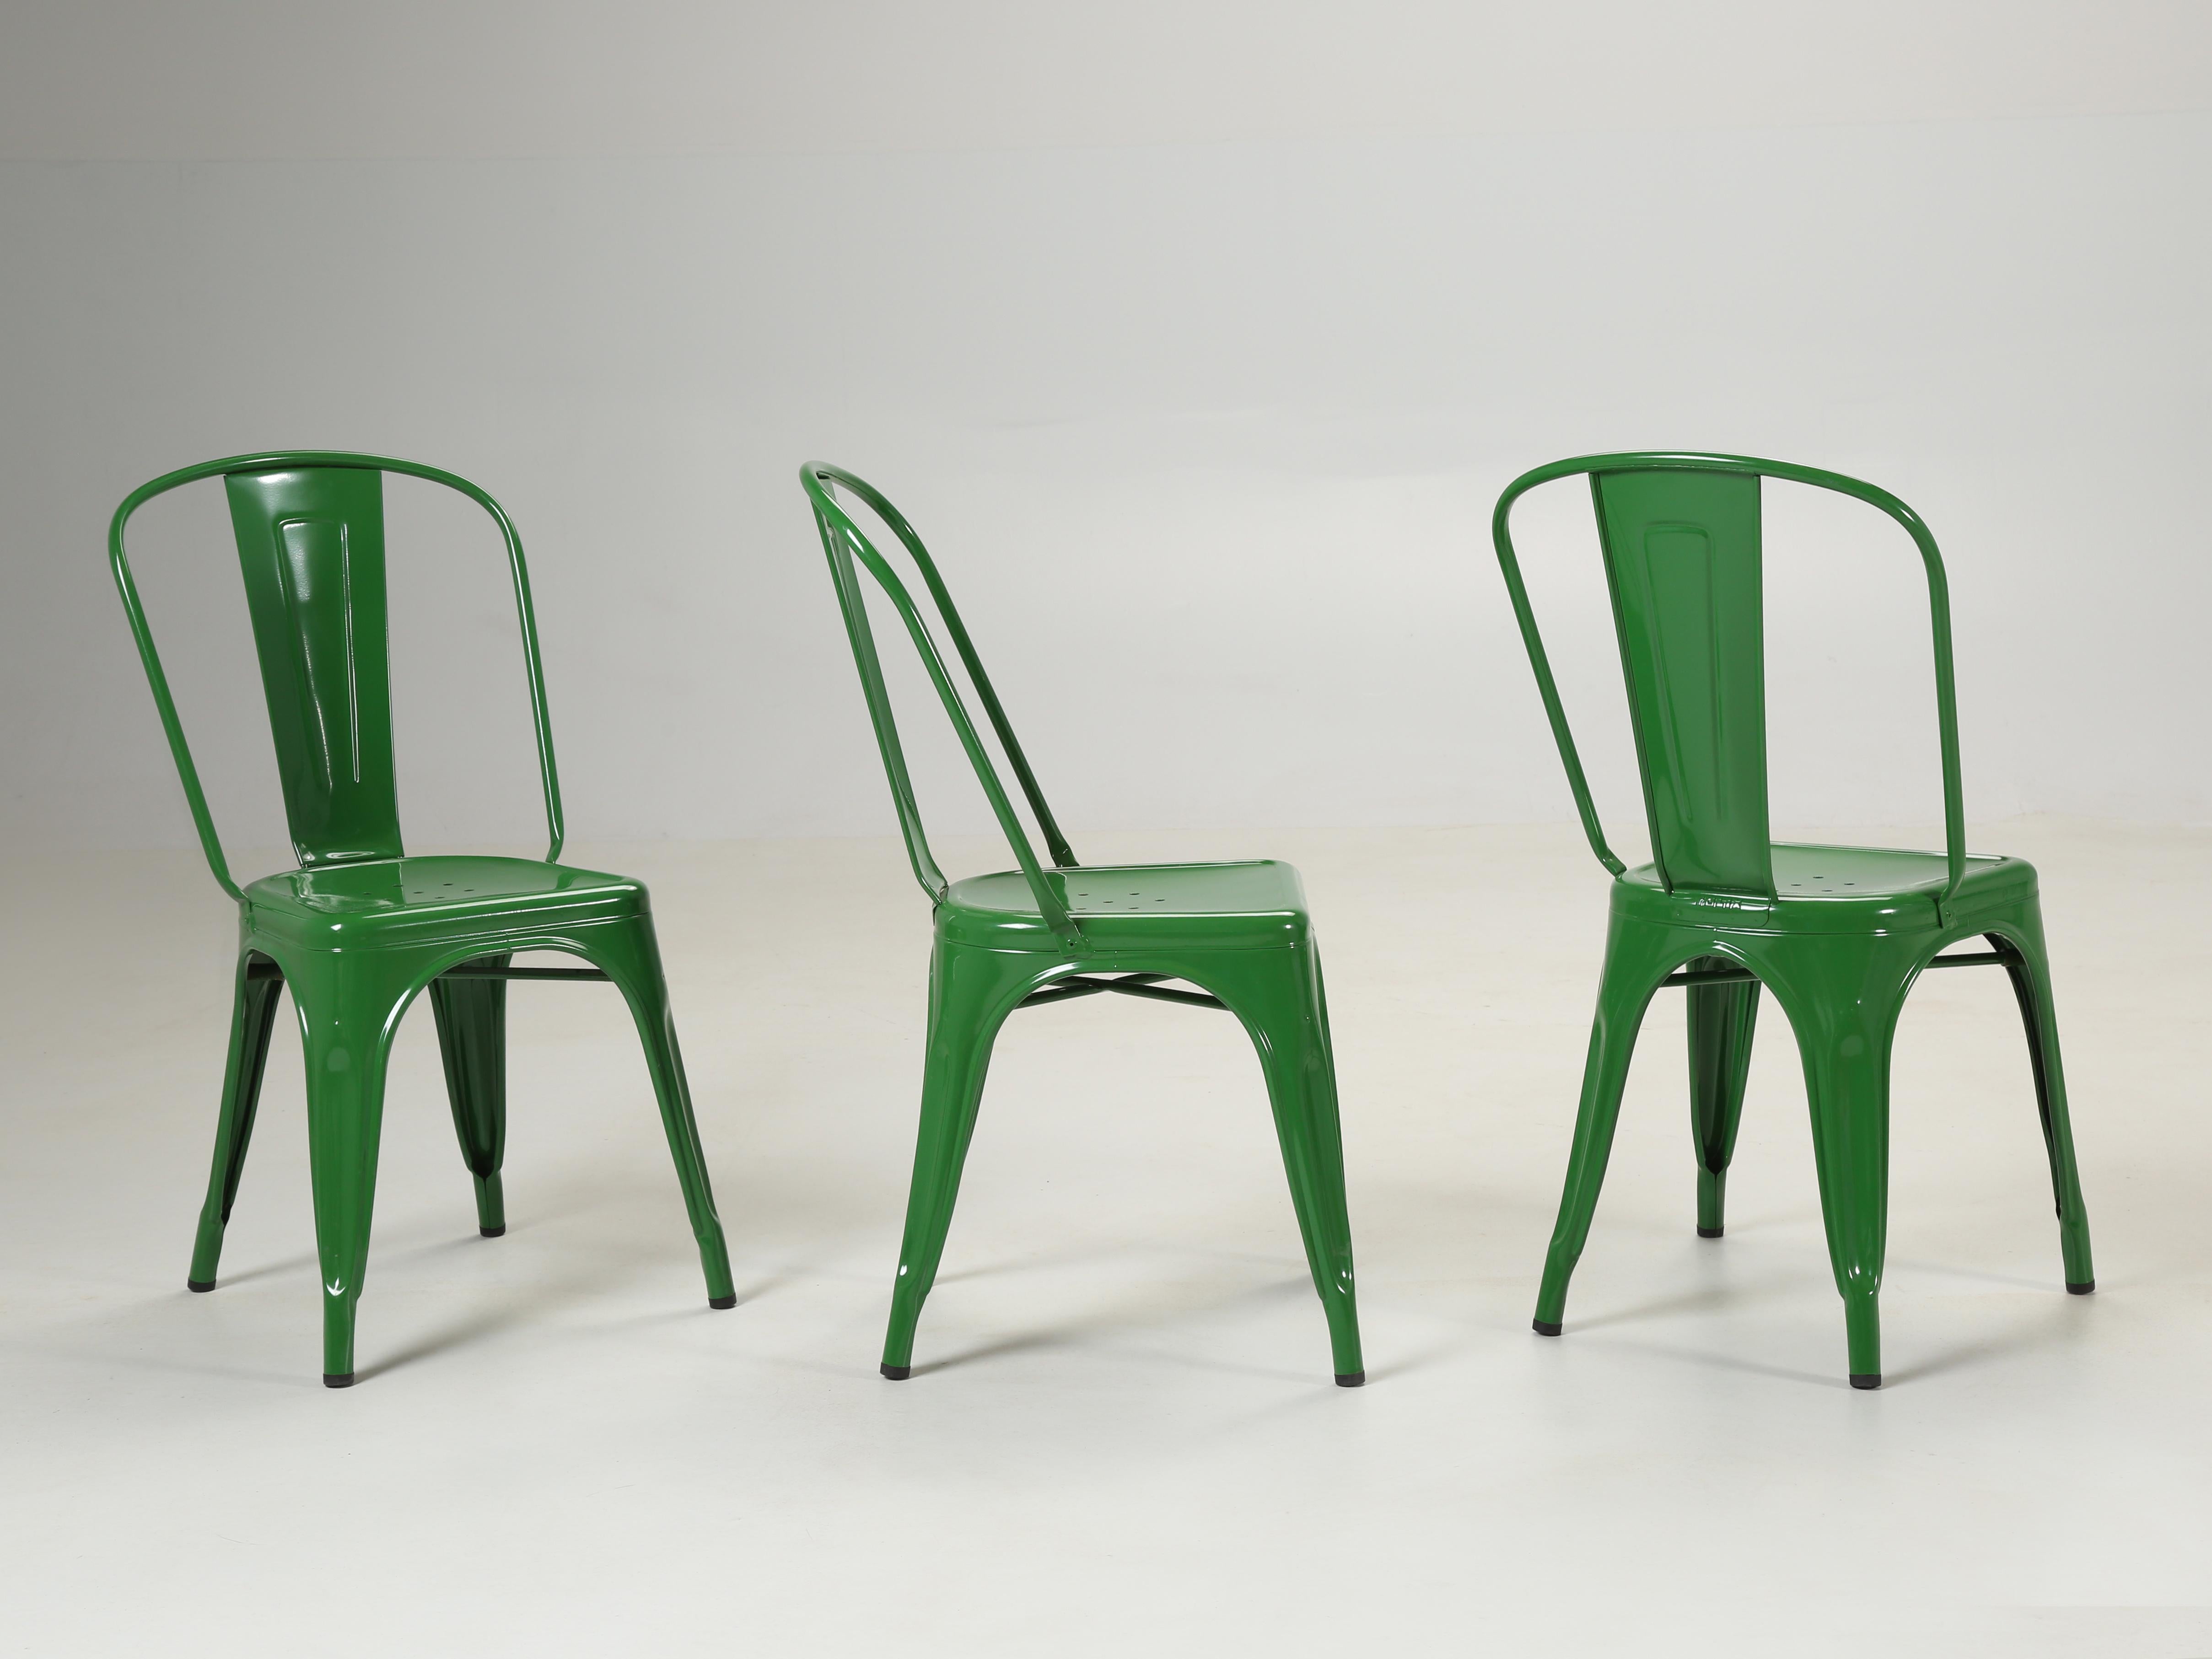 Genuine Tolix steel stacking chairs painted in their original Romarin green finish. This set of (5) Tolix stacking chairs have been in an warehouse for a number of years and will show some battle scars. Any and all flaws are only surface related and